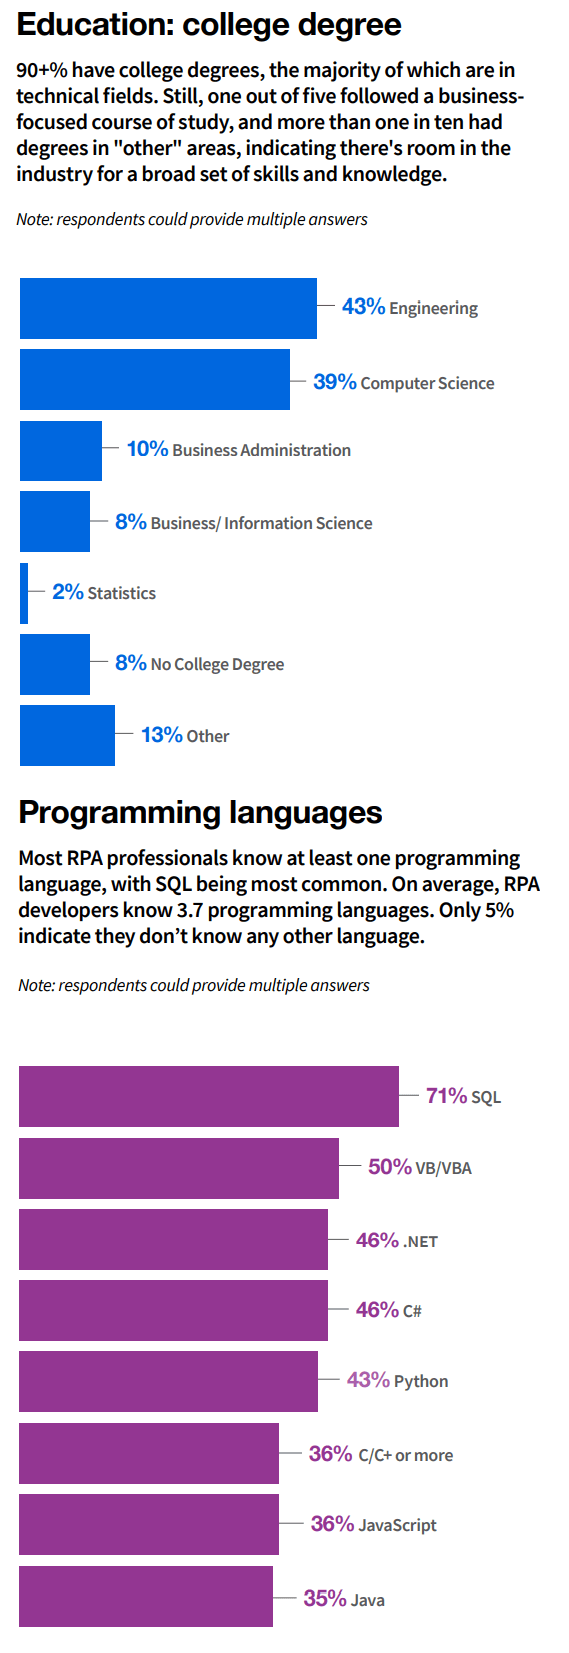 UiPath_2020 State of Dev Education and programming languages